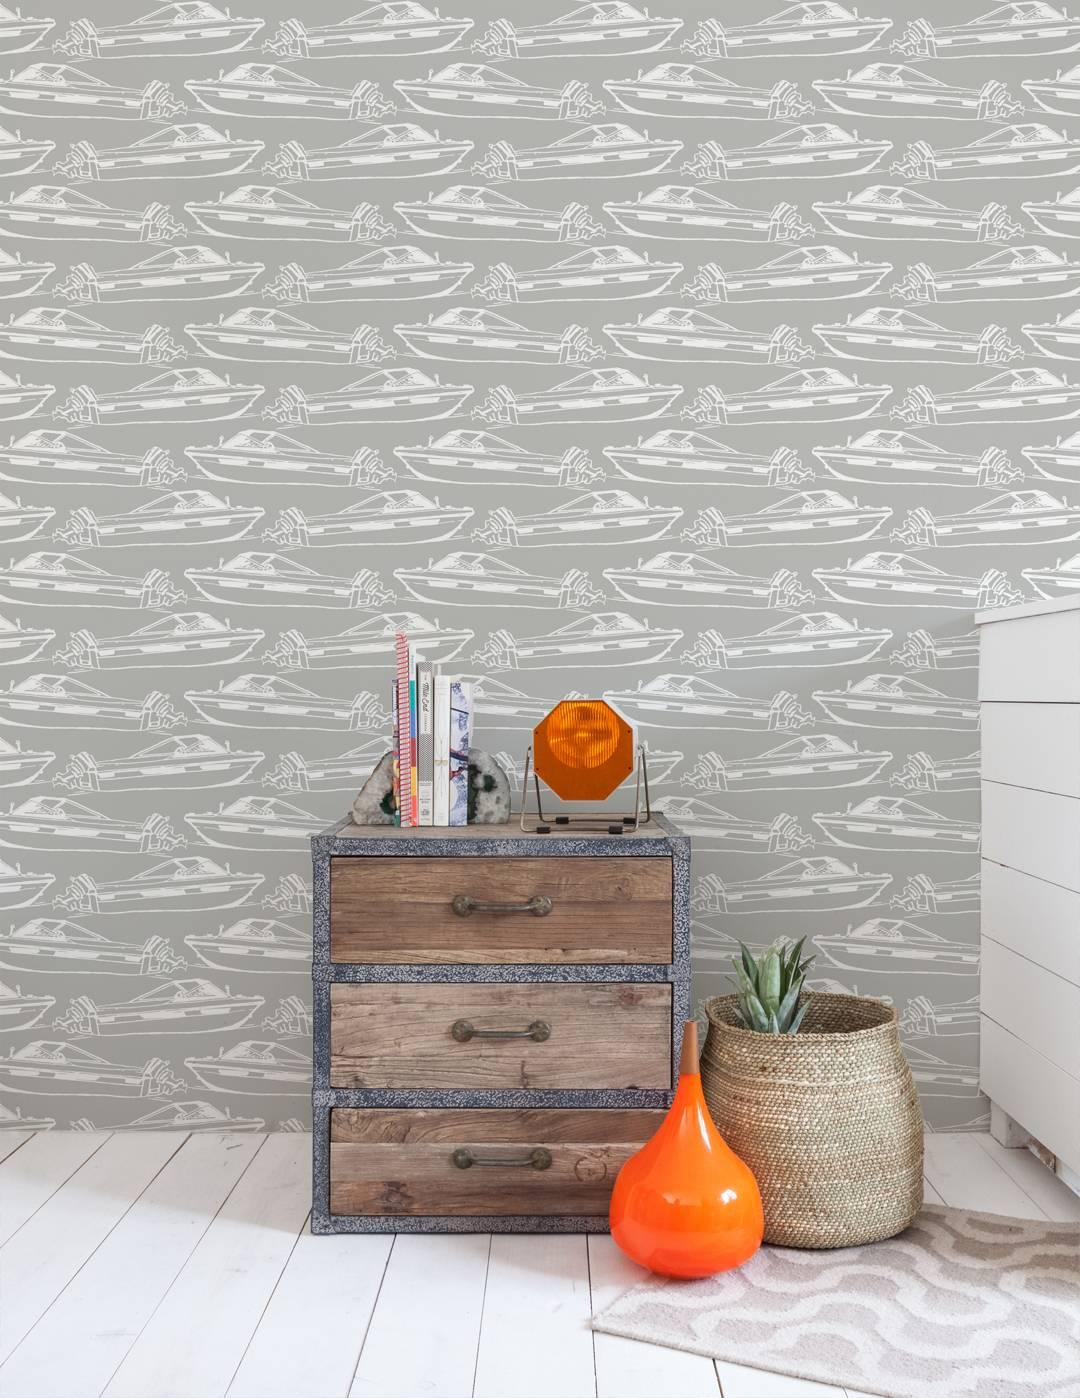 This beautiful speedboat wallpaper is a collaboration with Finnish designer Paola Suhonen of Ivana Helsinki.
 
Samples are available for $18 including US shipping, please message us to purchase.  

Printing: Digital pigment print (minimum order of 4